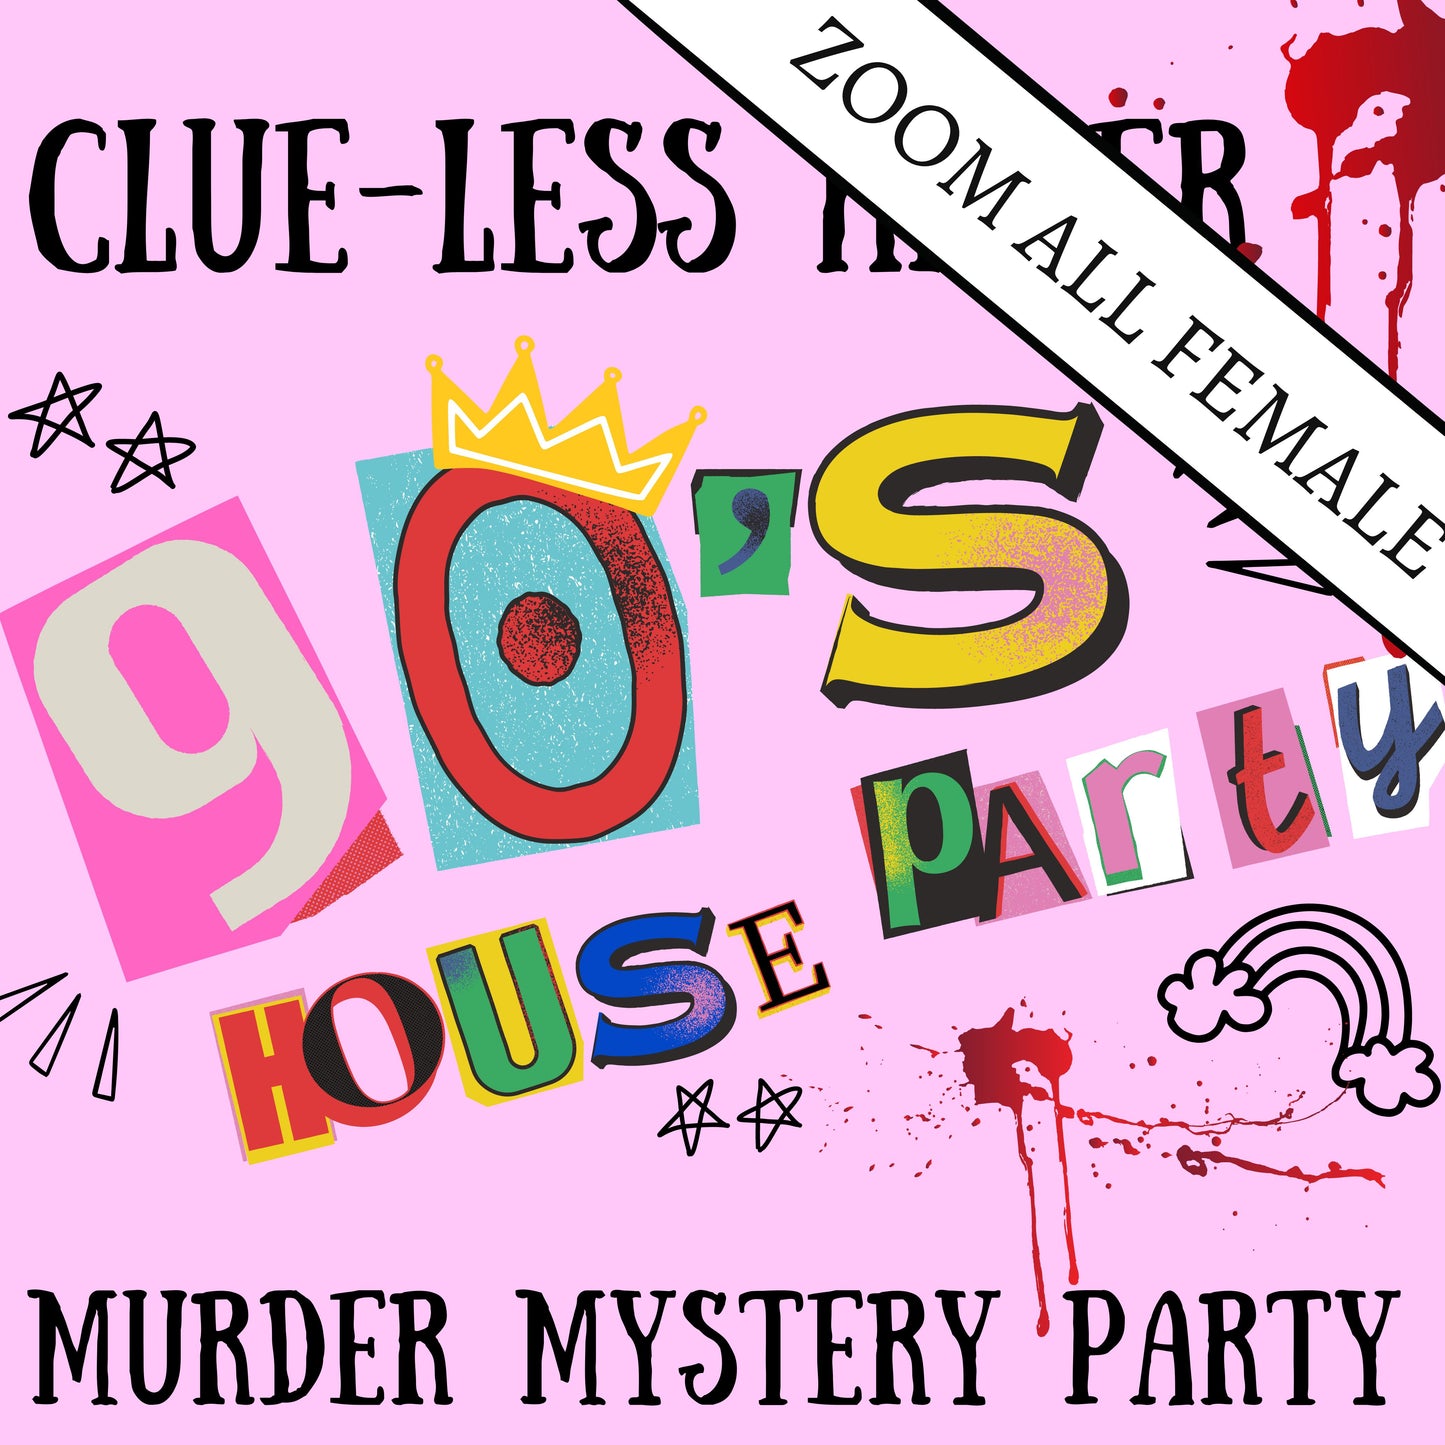 Fun and colourful fully scripted 90s house party themed murder mystery party game for 5-10 players All Female